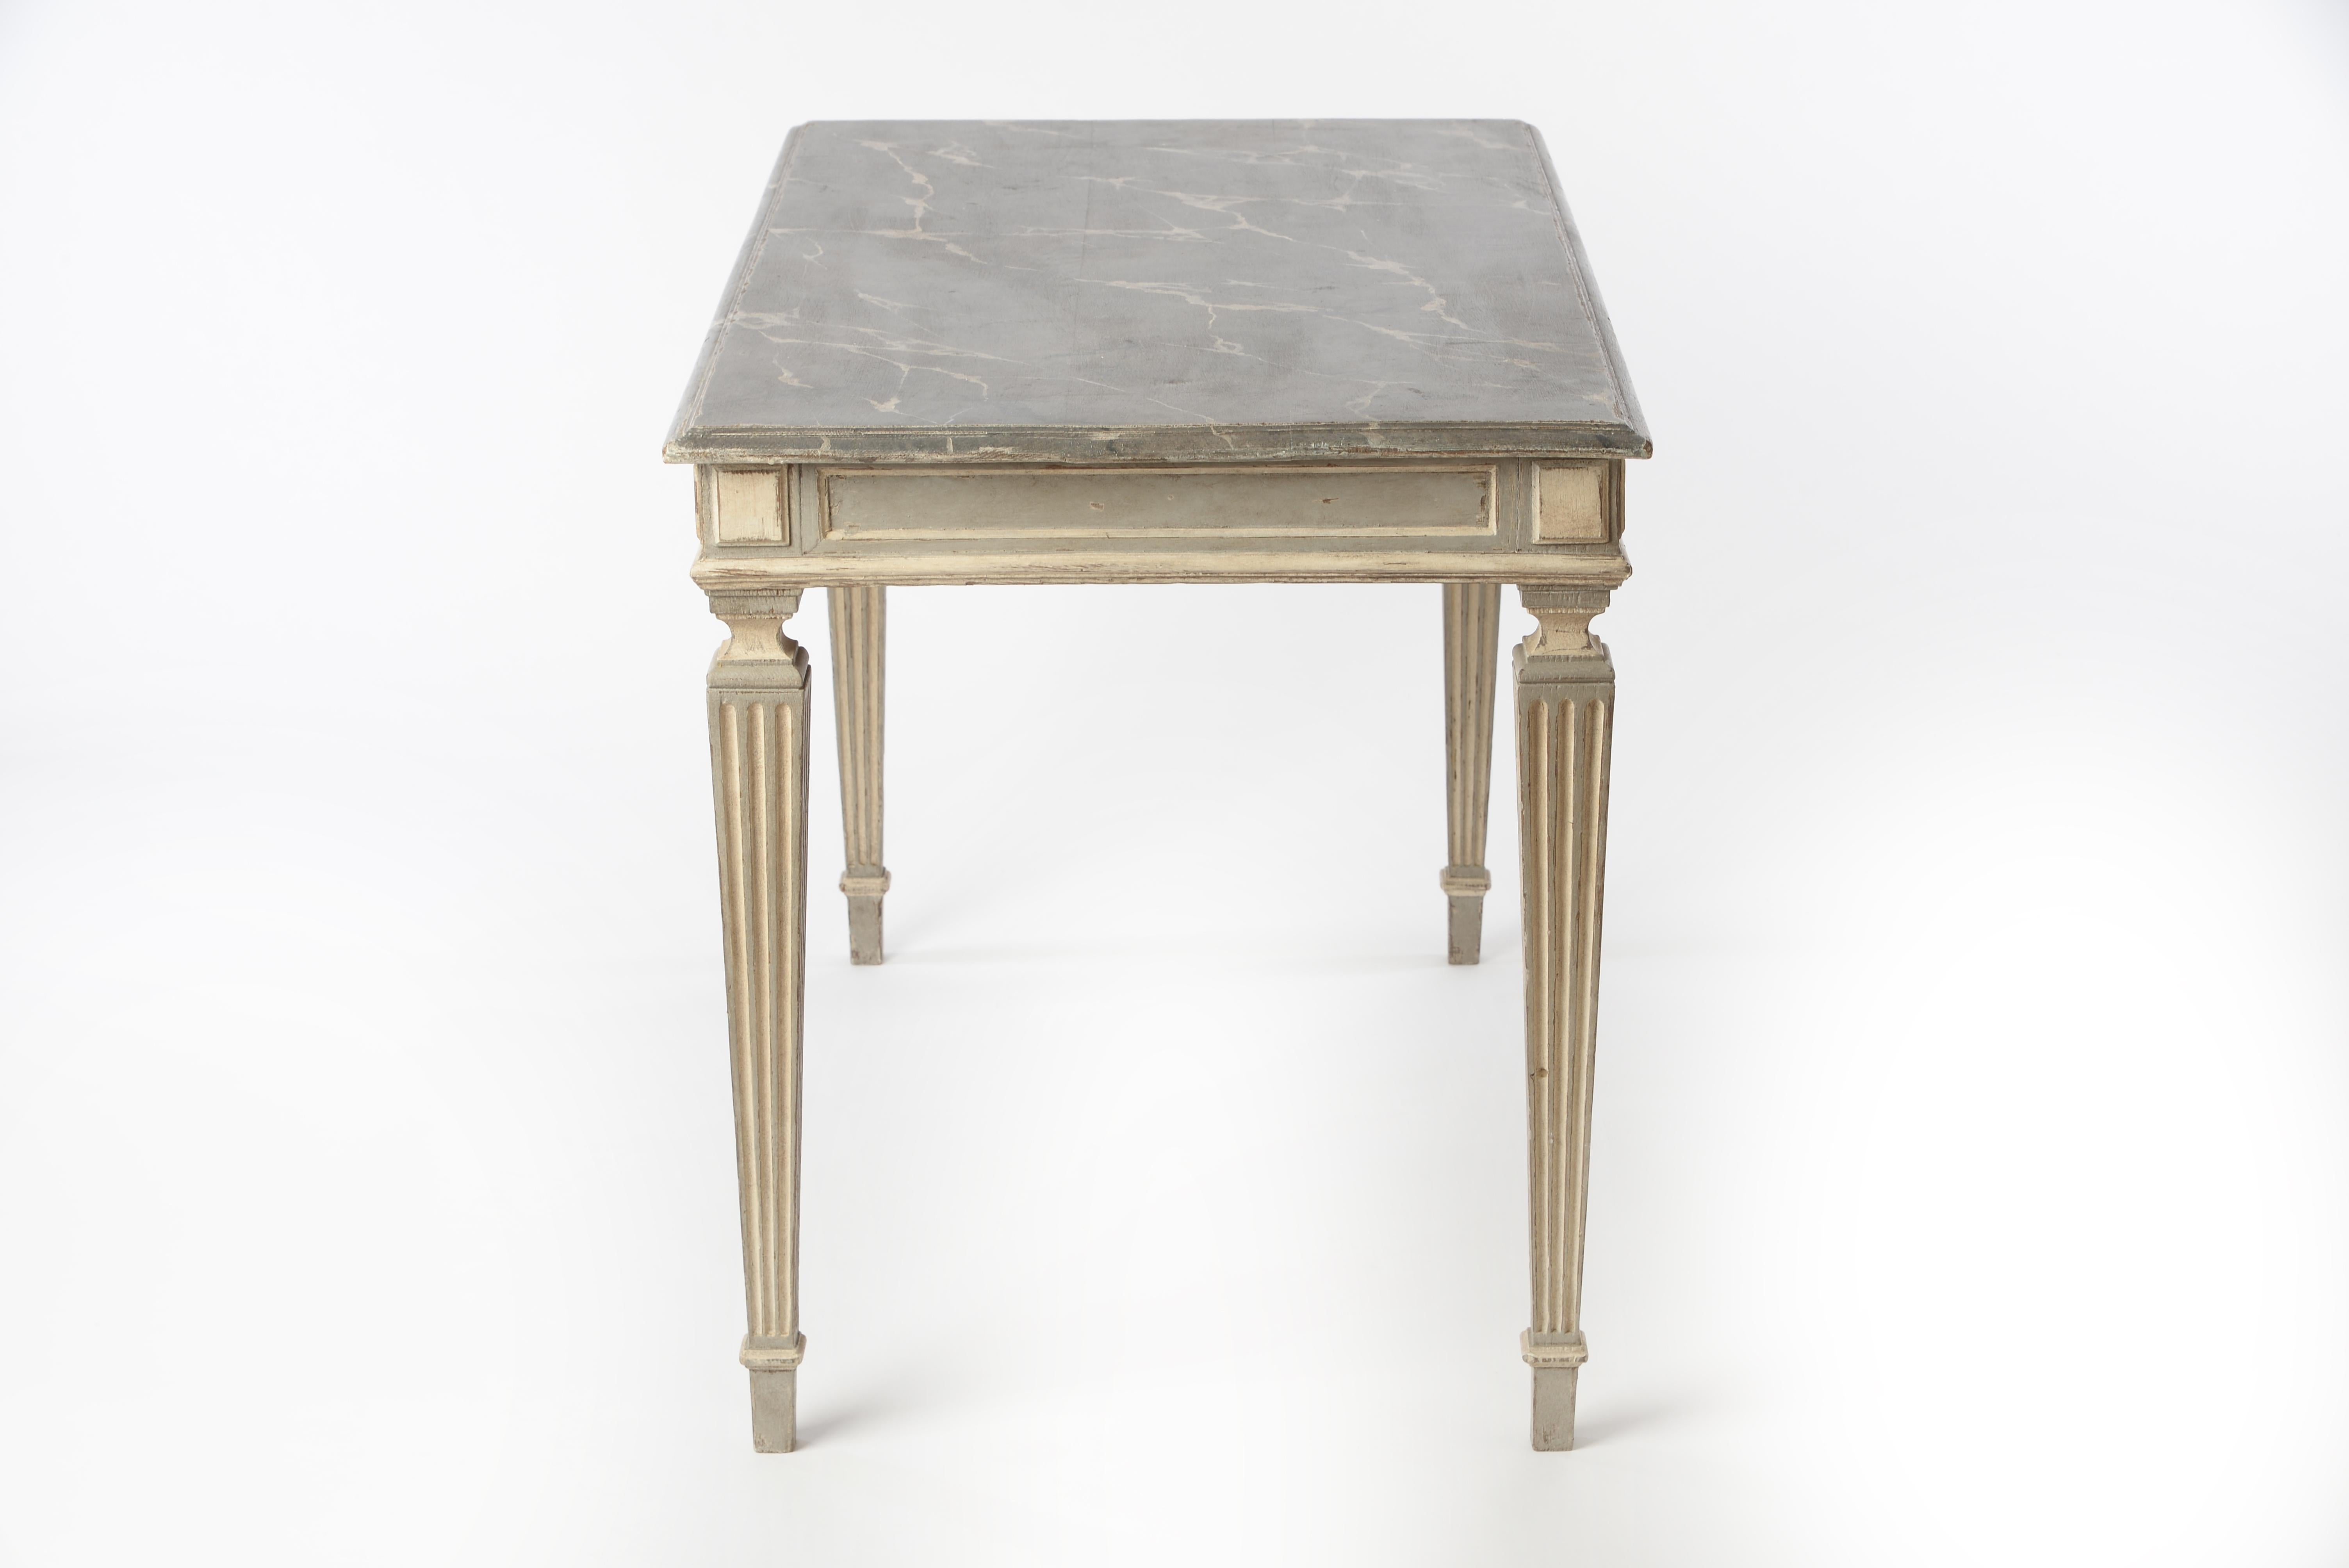 This gorgeous French console table in the style of Louis XVI comes with a beautifully marbled table top and carved legs. Very elegant table that could even be used as a small dining table due to its larger size. New paint.